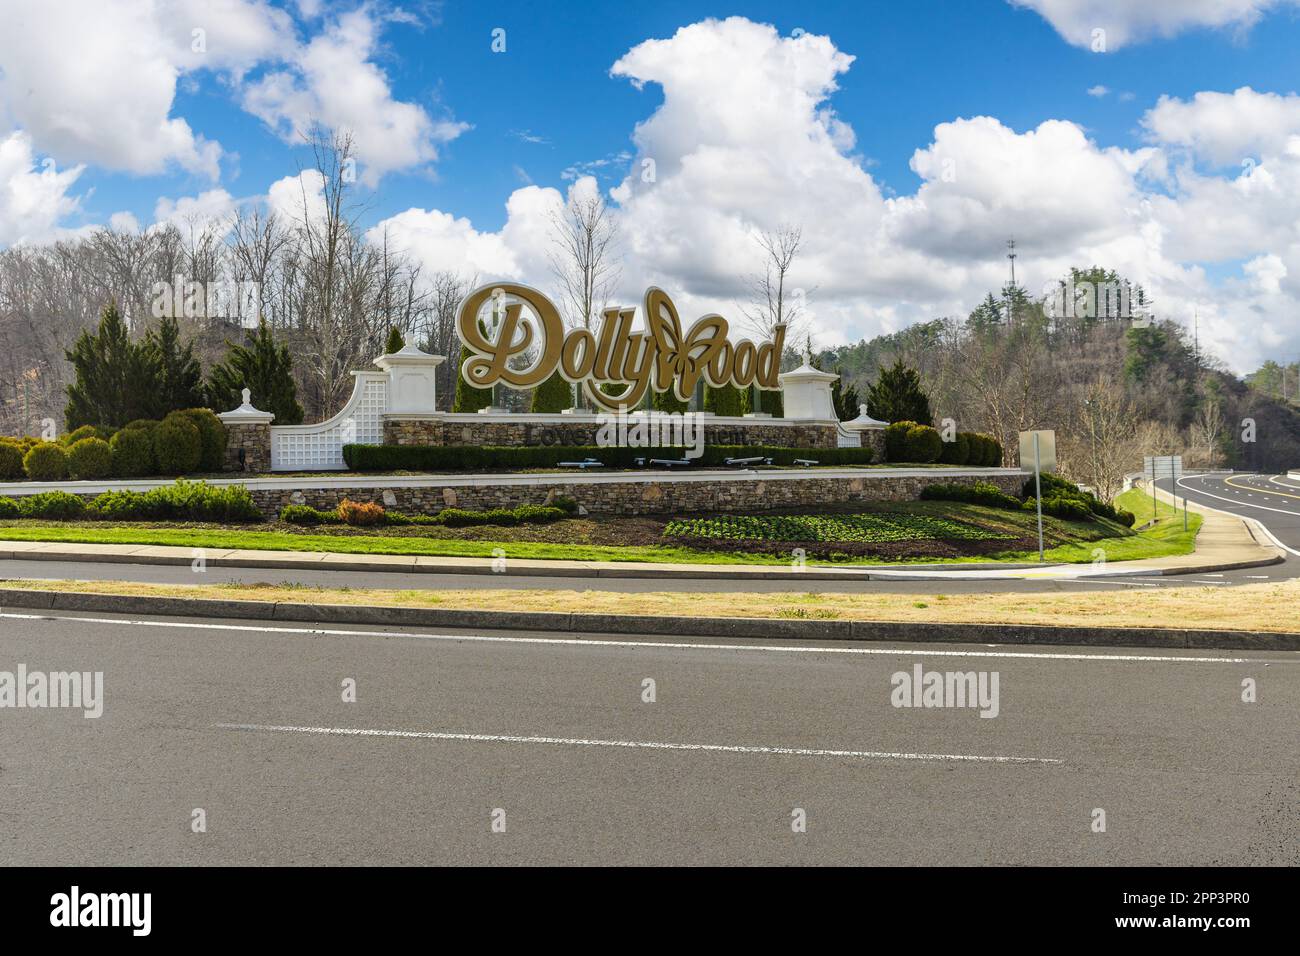 Pigeon Forge, TN - March 2022: Dollywood sign near the entrance to the theme park in Pigeon Forge, TN. Stock Photo